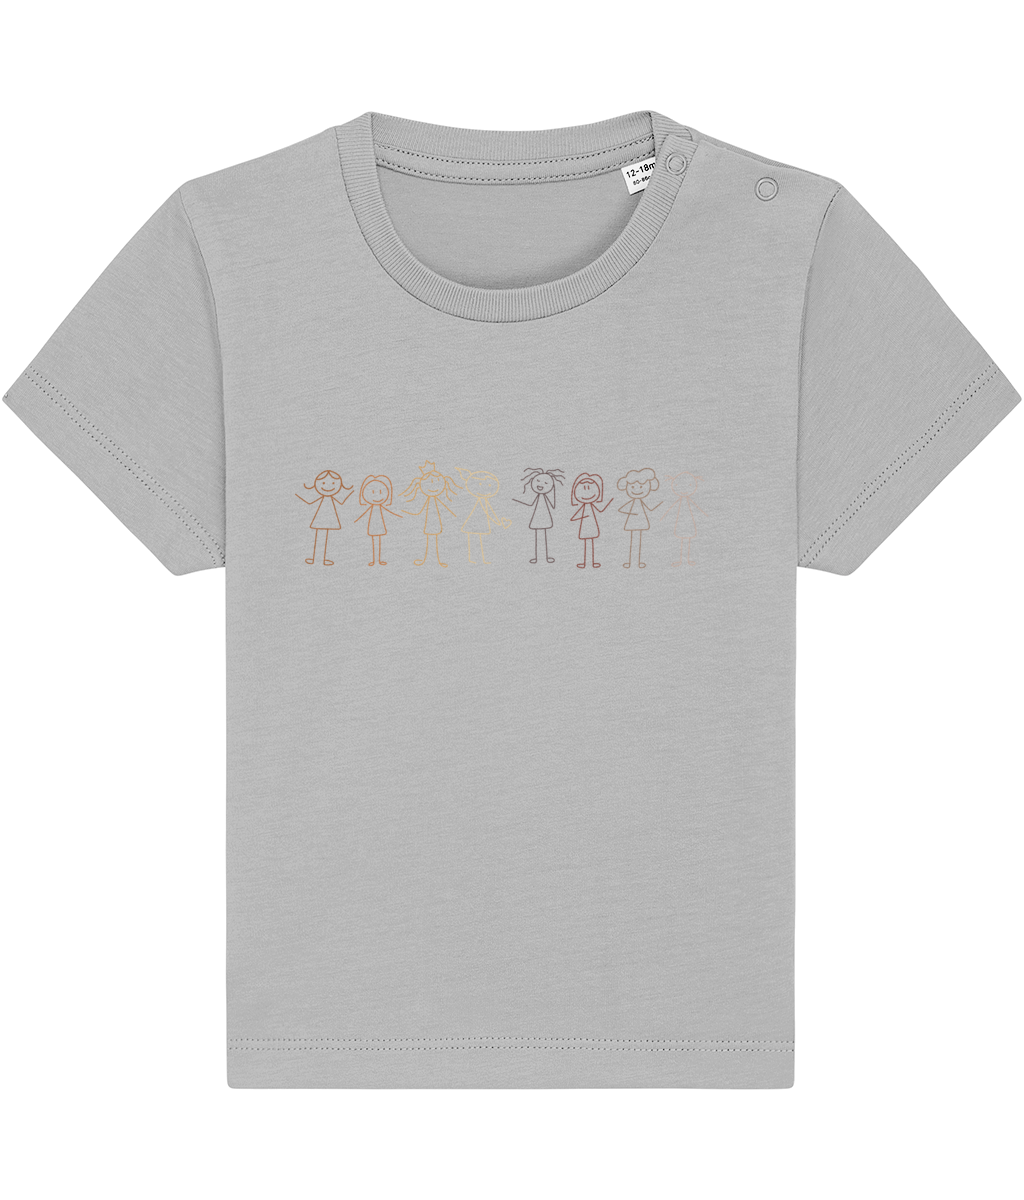 Be Friends Baby Toddler Girl Vegan Organic Cotton T Shirt - Buy any 3 get 10% off